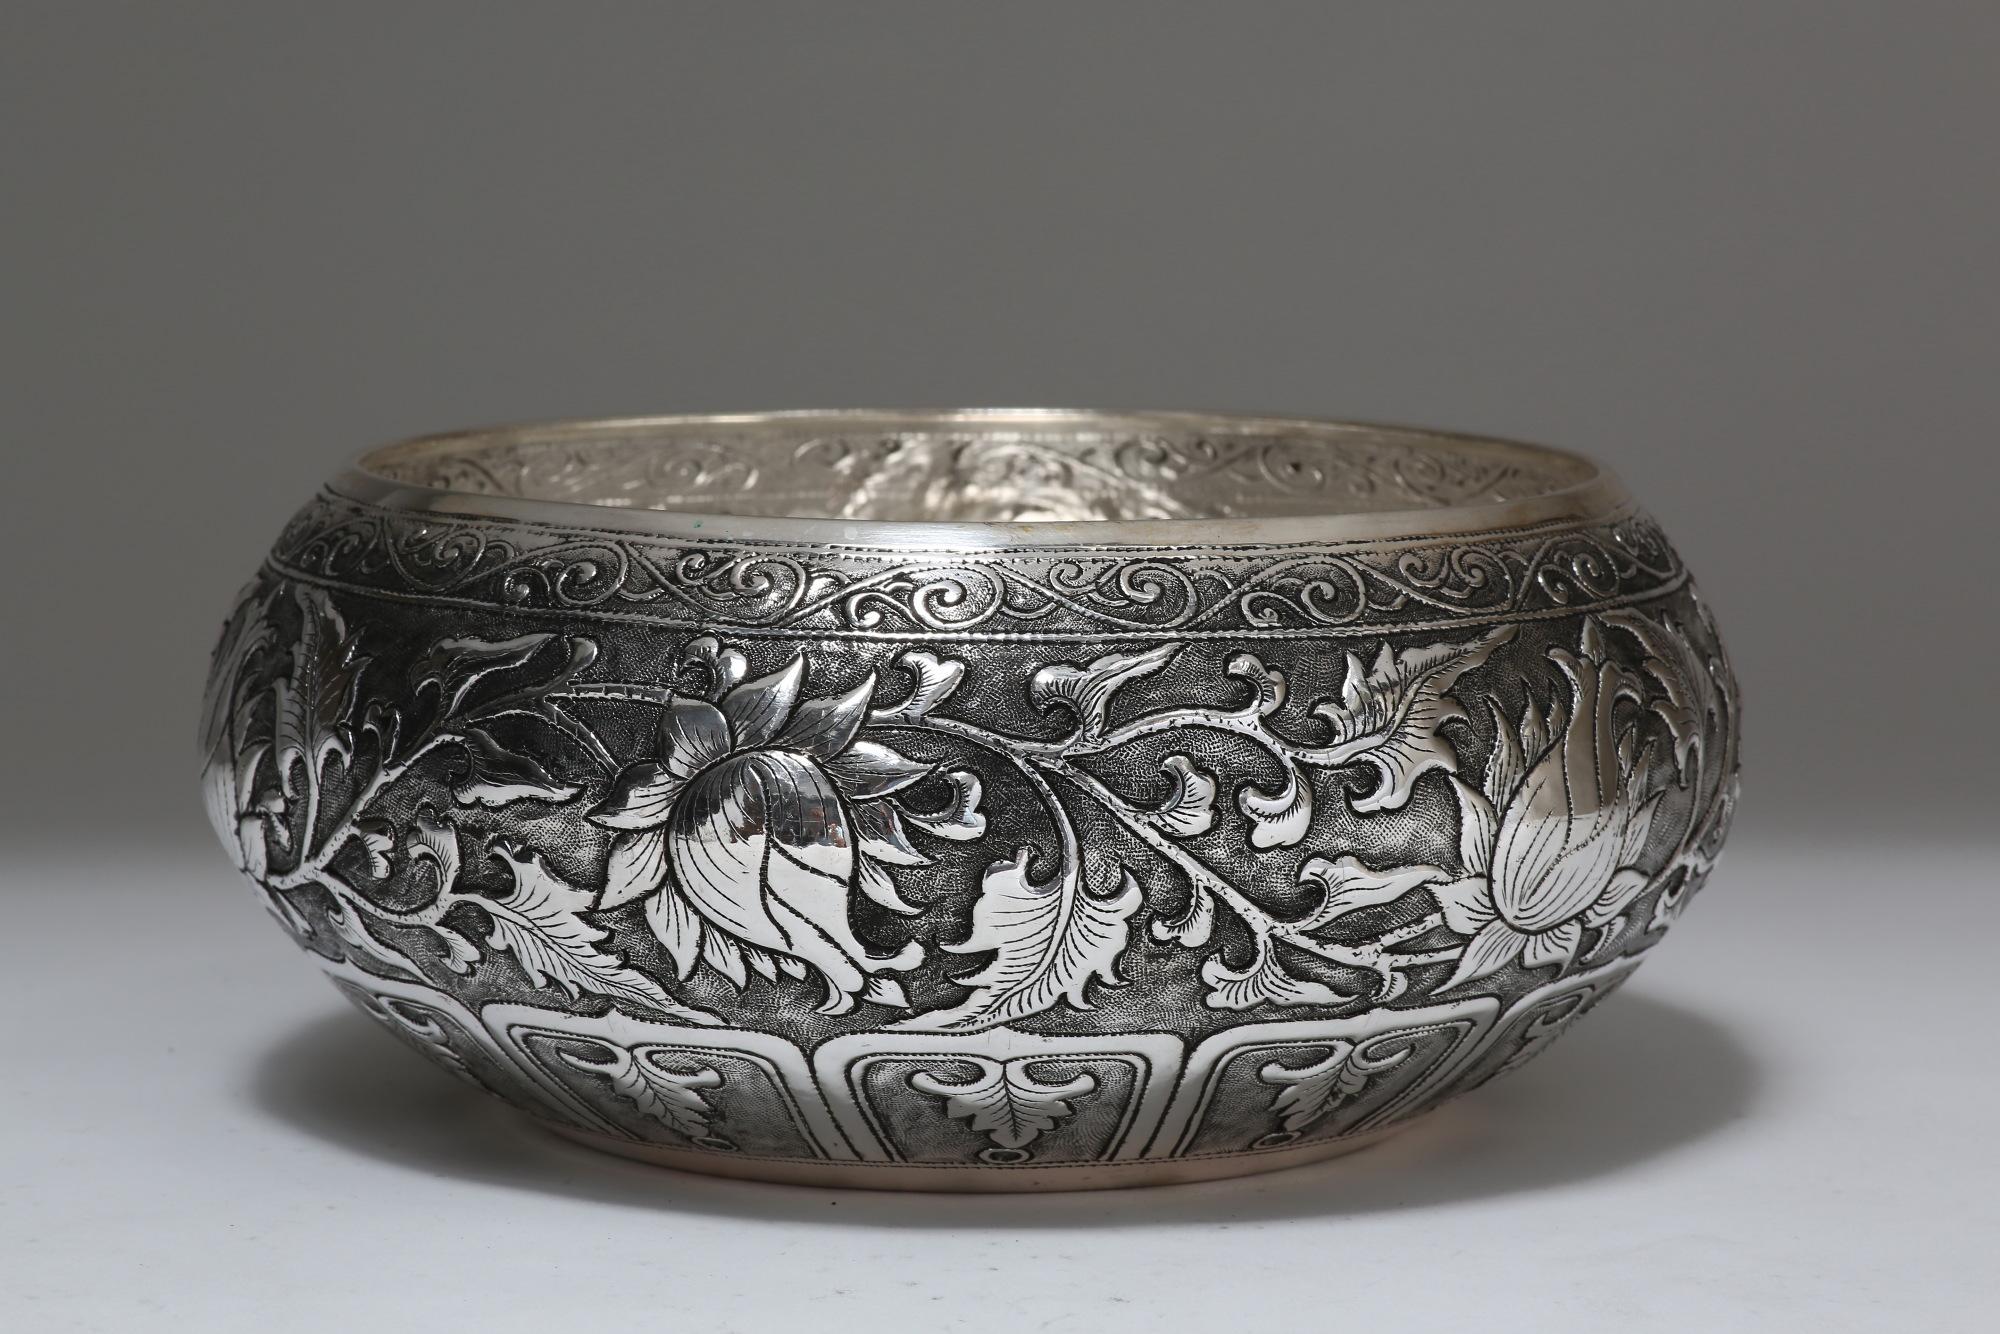 Cambodian Contemporary Hand-Worked Solid Silver Bowl, Chinese Floral Motif, Centerpiece